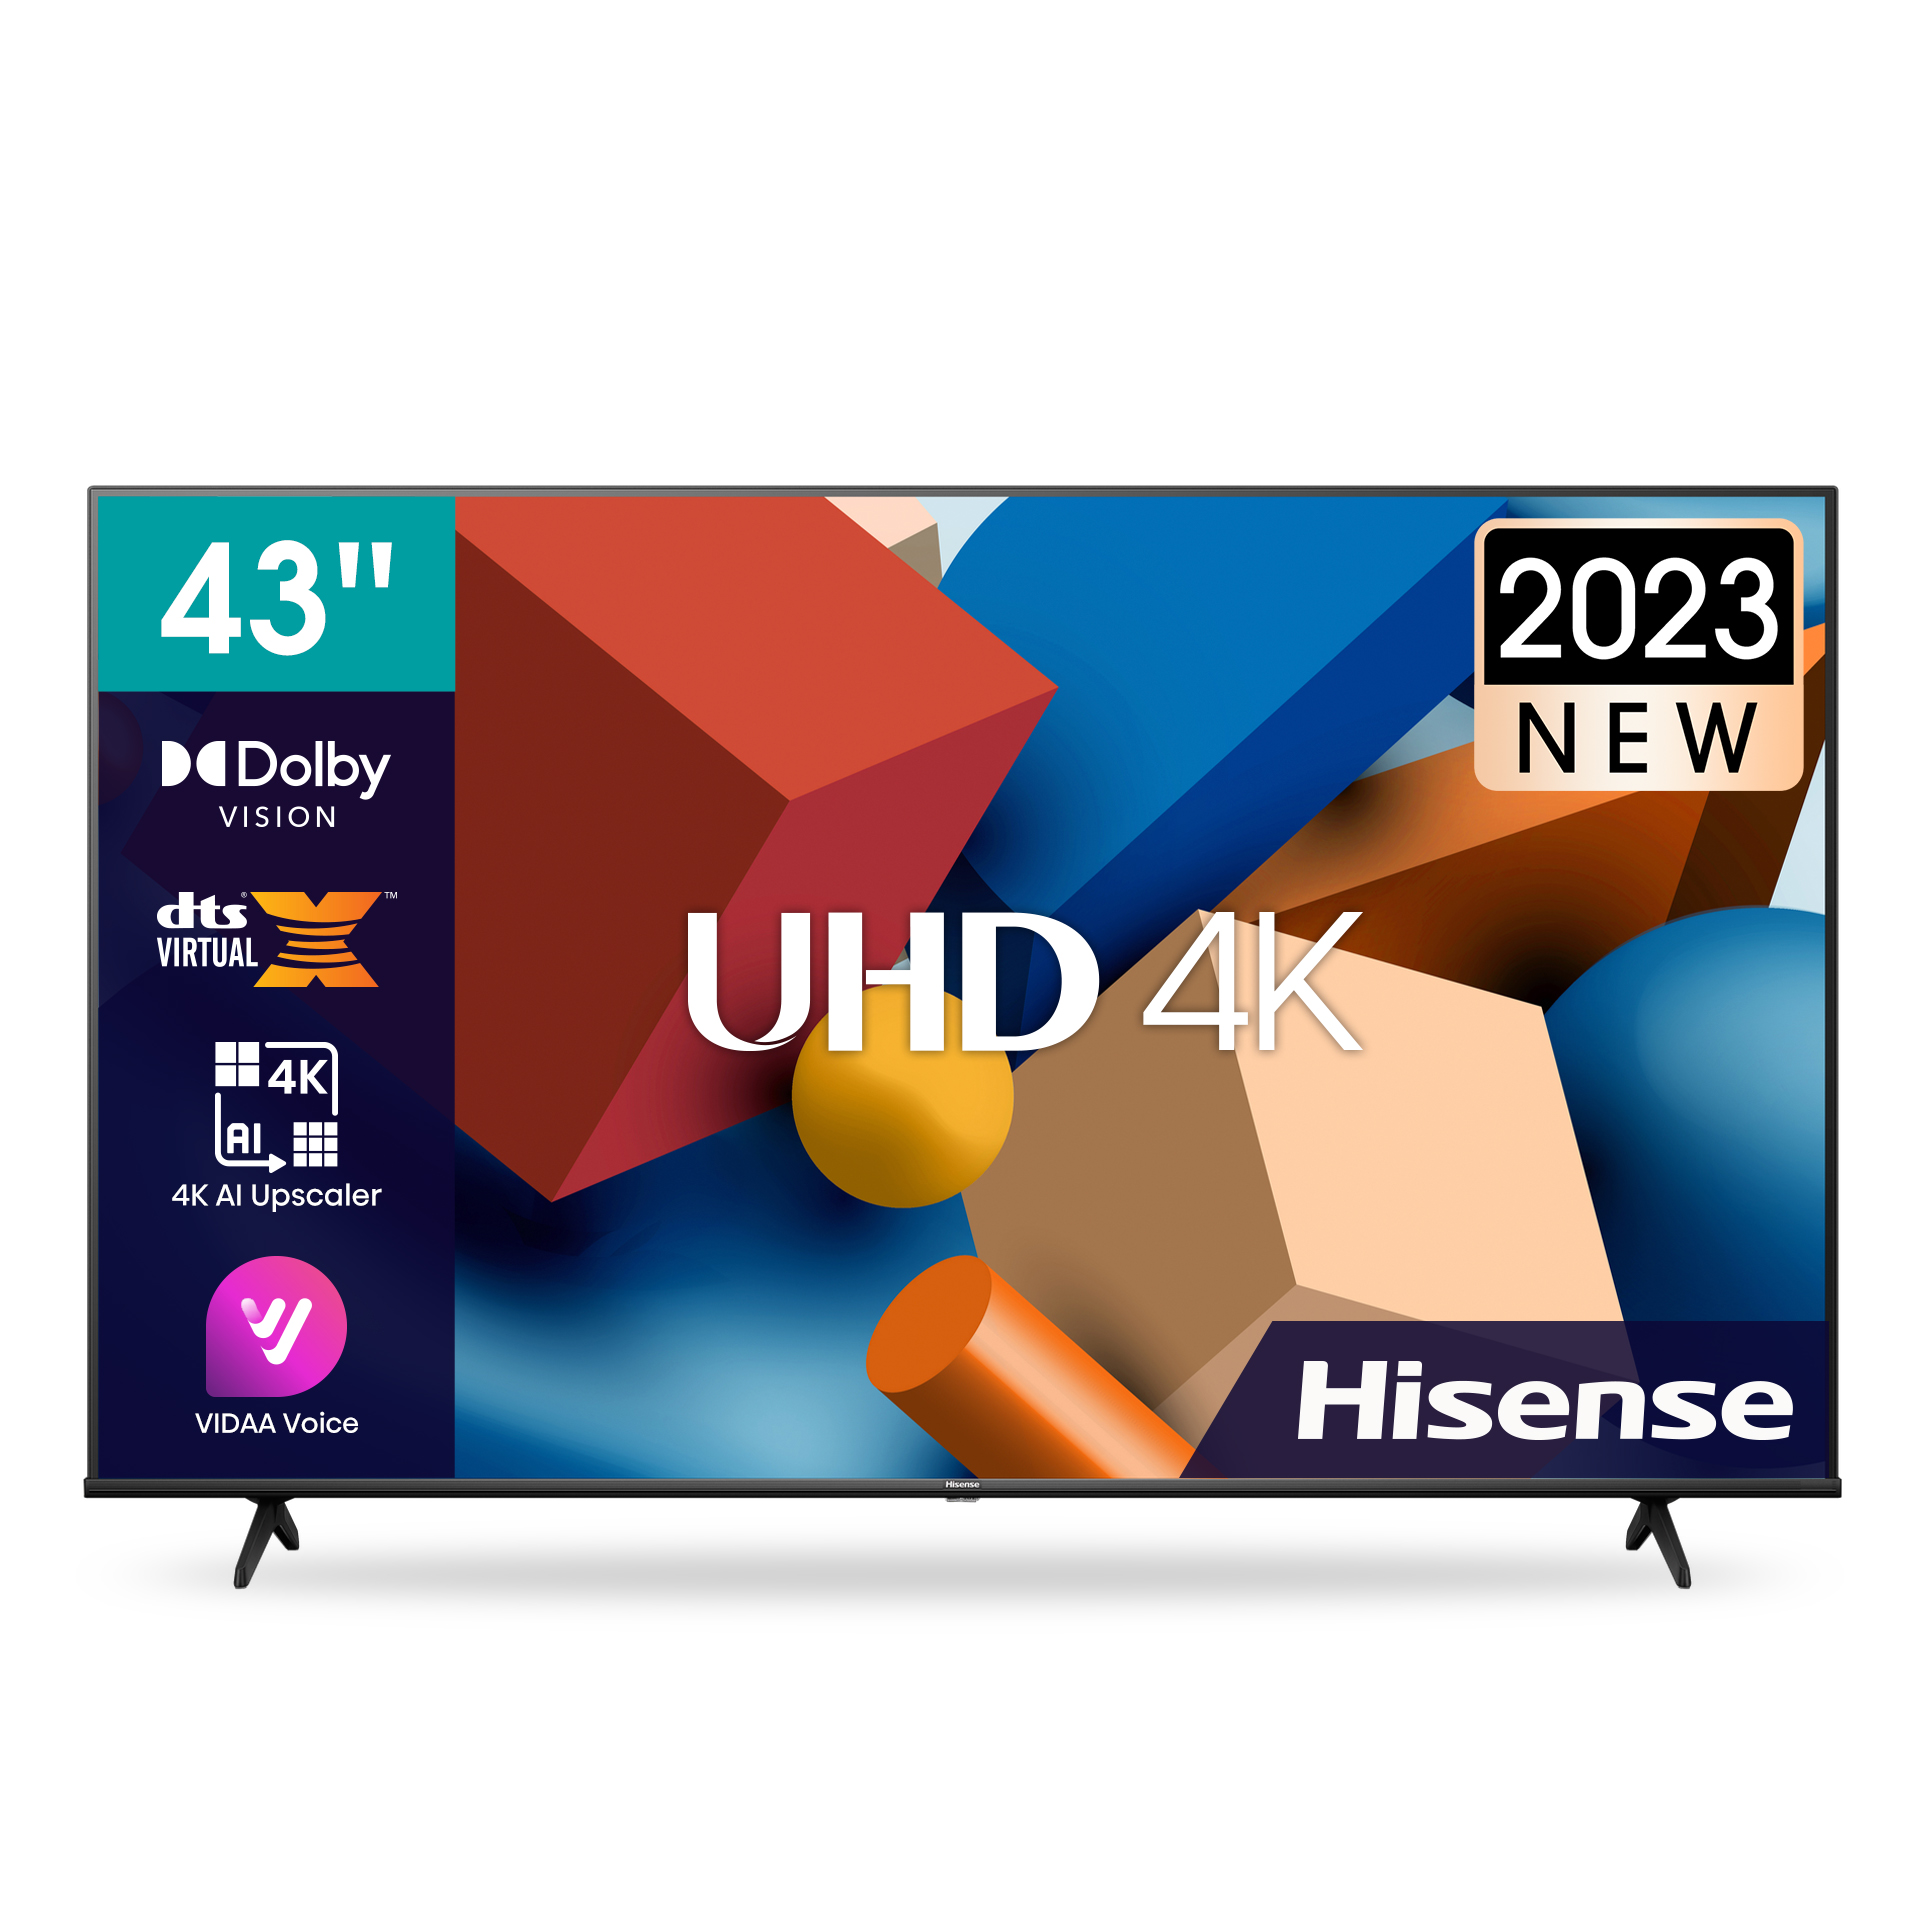 Hisense 43 Inch TV 4K UHD Smart TV, With Dolby Vision HDR, DTS Virtual X,  , Netflix, Freeview Play & Alexa Built-in, Bluetooth & WiFi Black